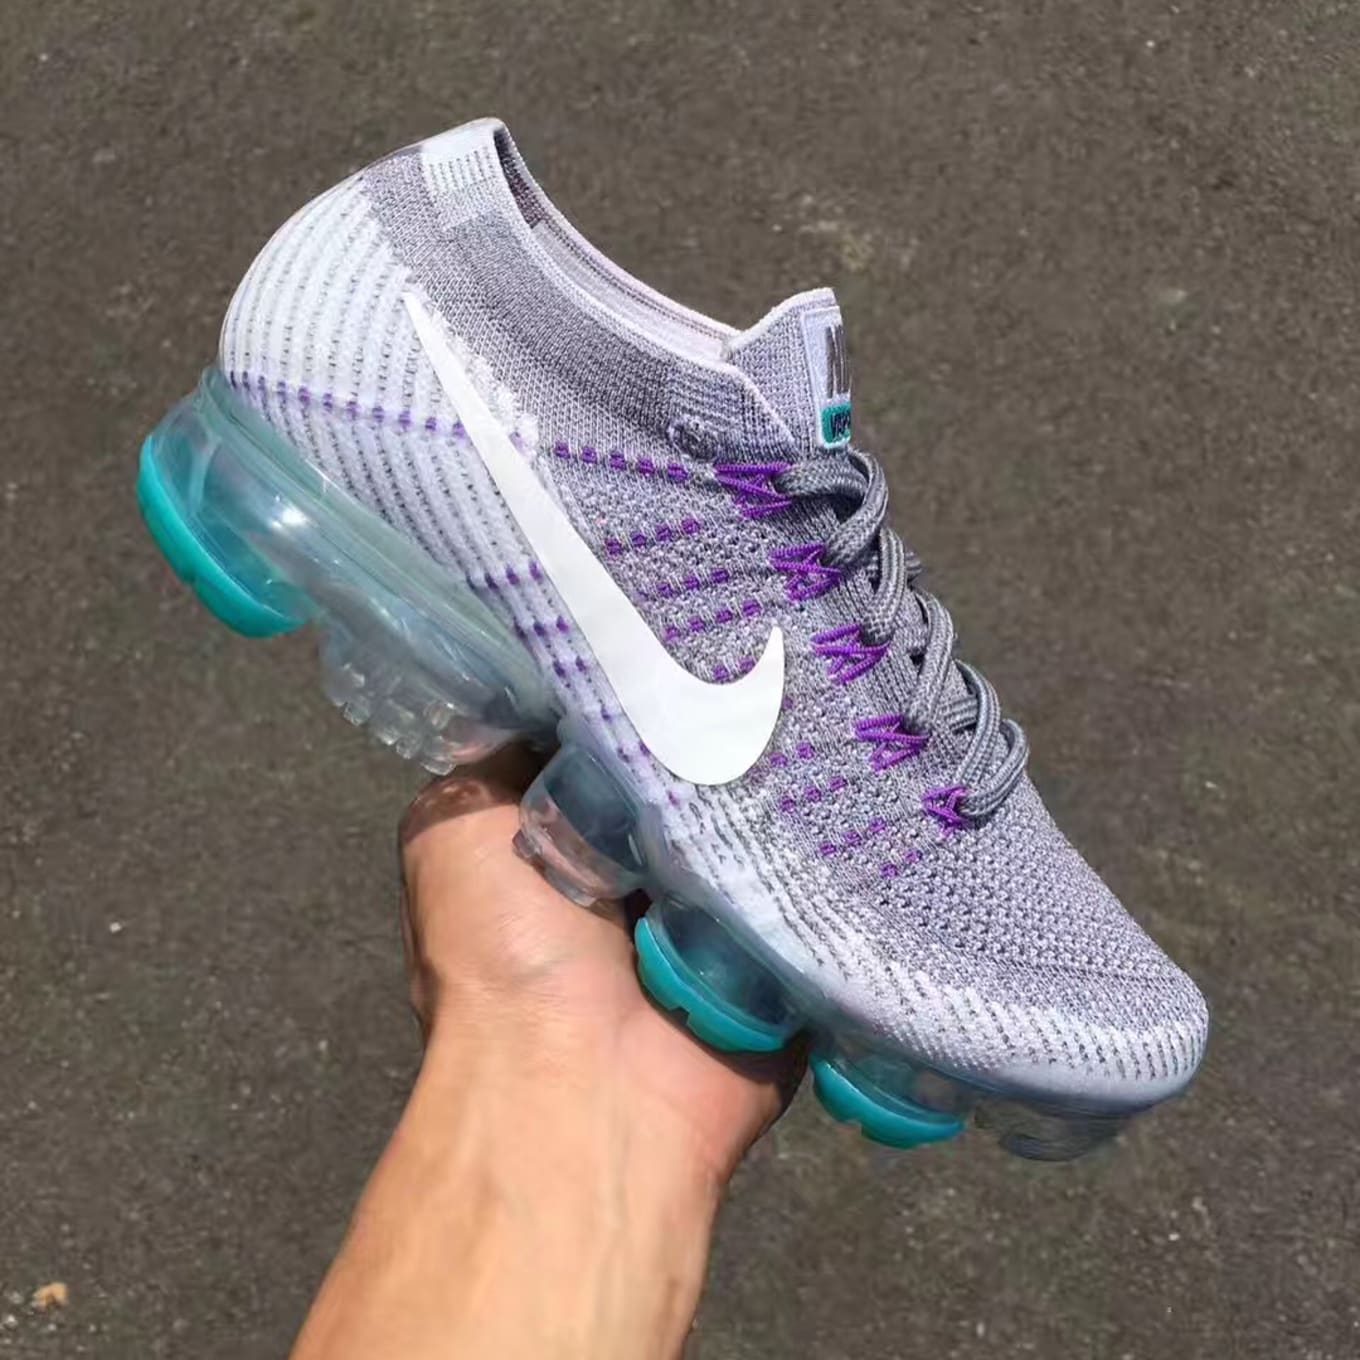 first vapormax colorway